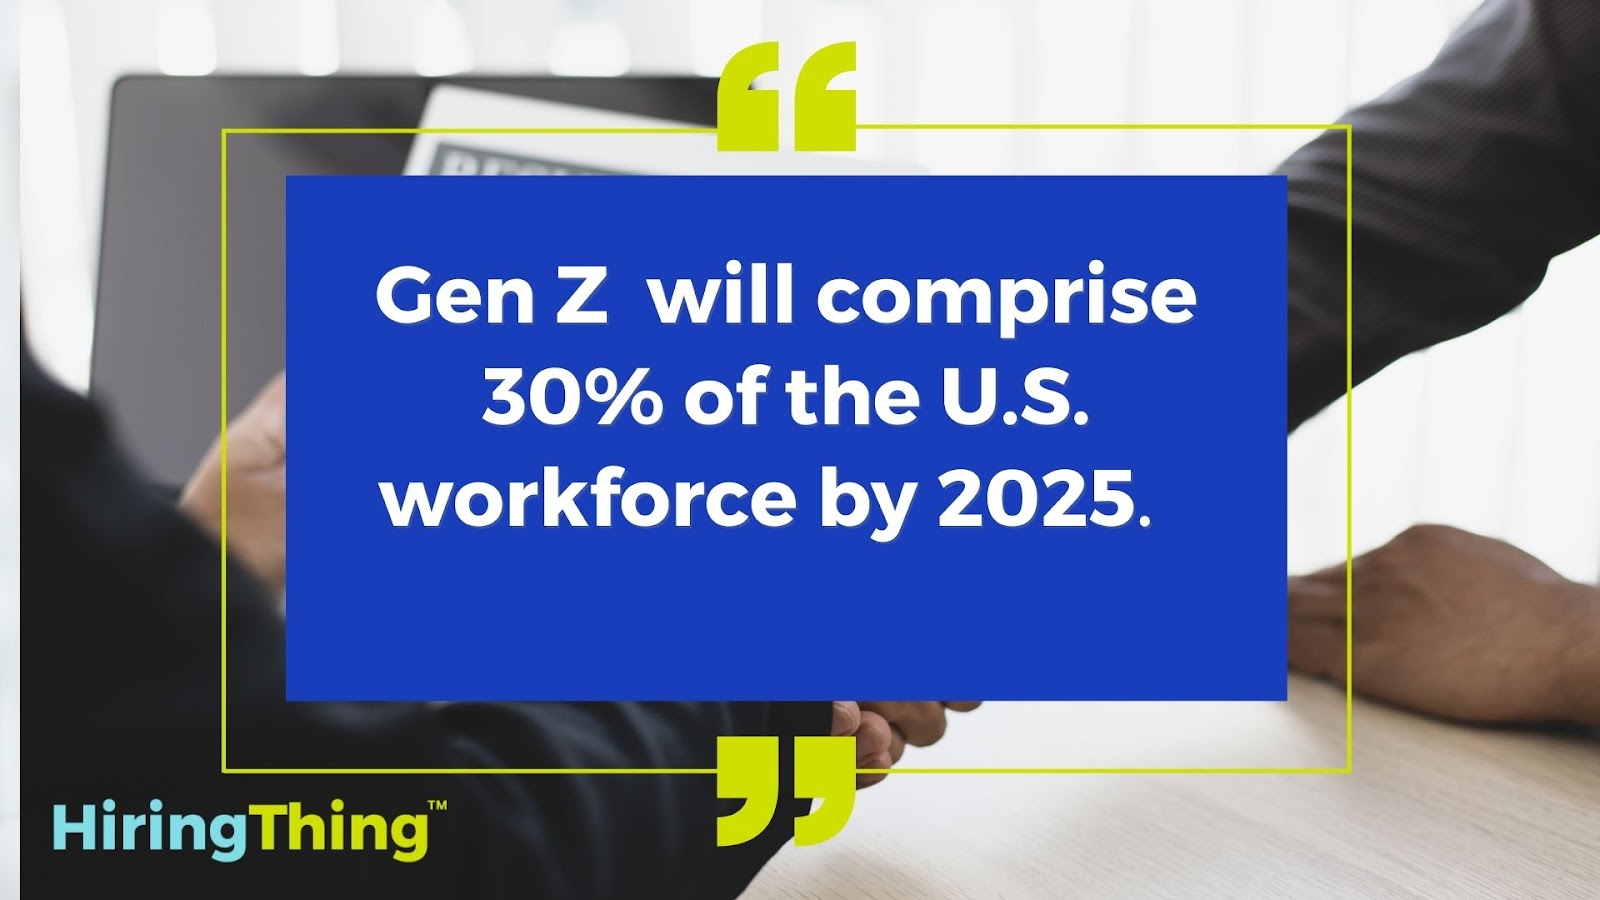 "Gen Z will comprise 30% of the U.S. workforce by 2025."